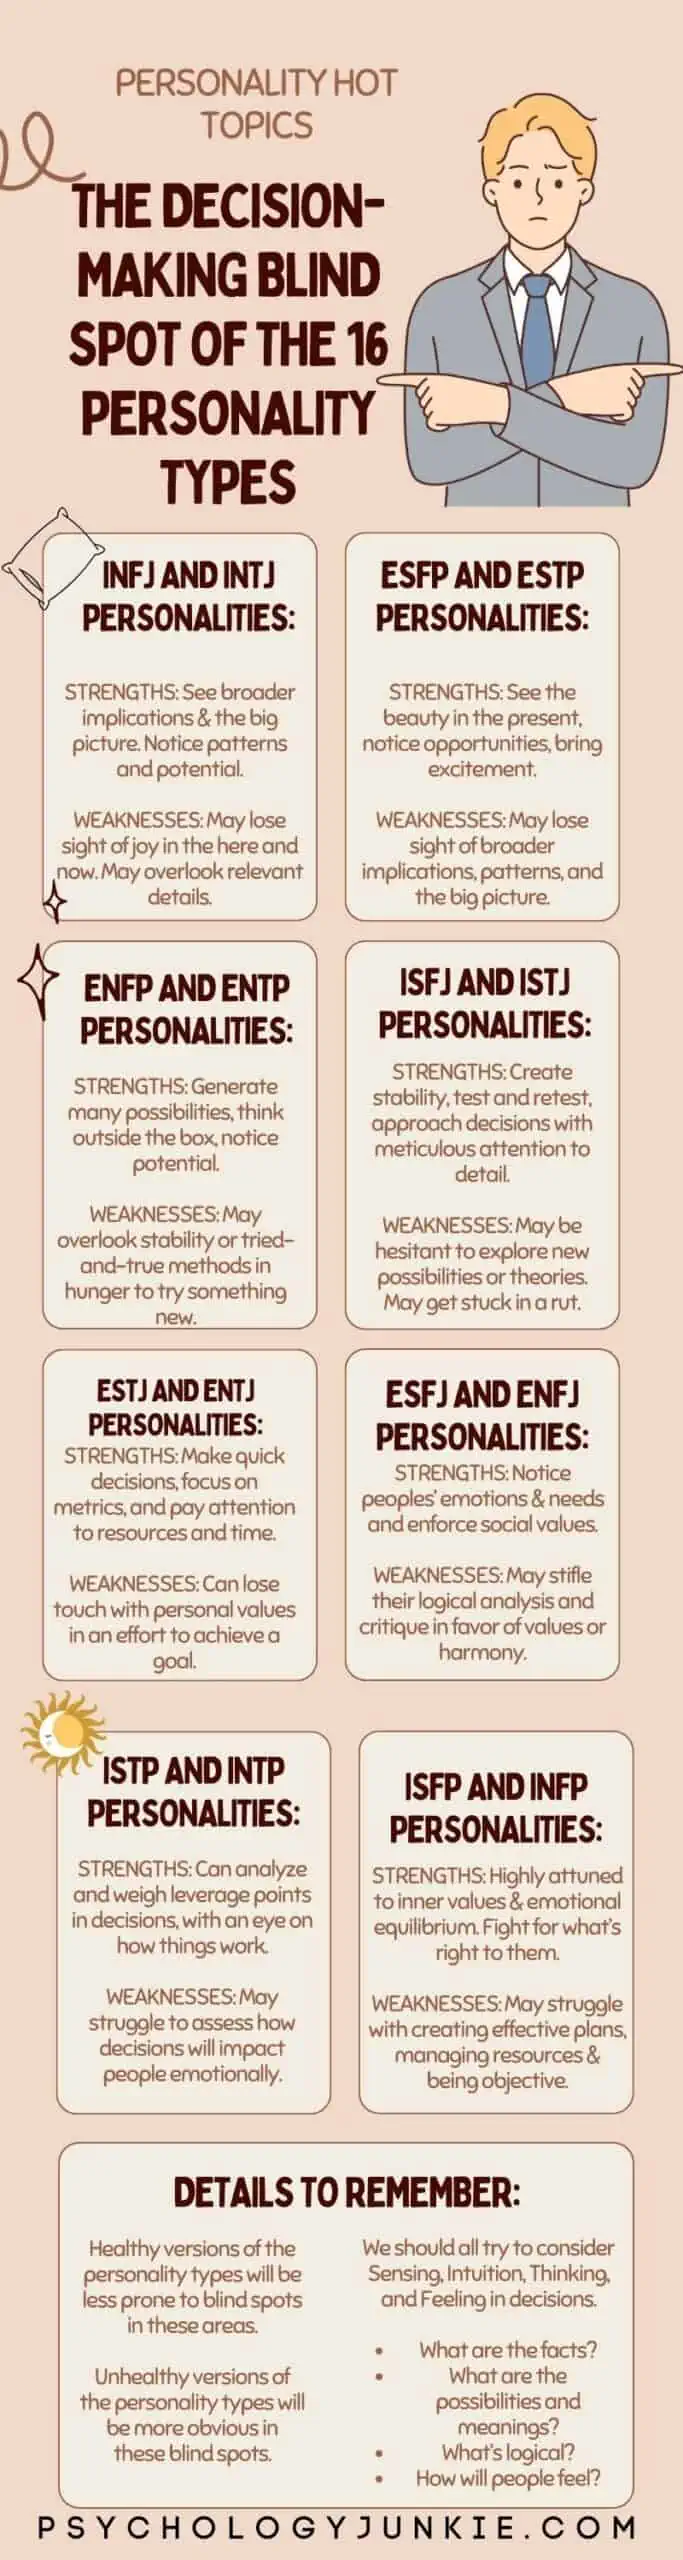 Infographic describing the decision making weaknesses of each of the 16 Myers-Briggs personality types.